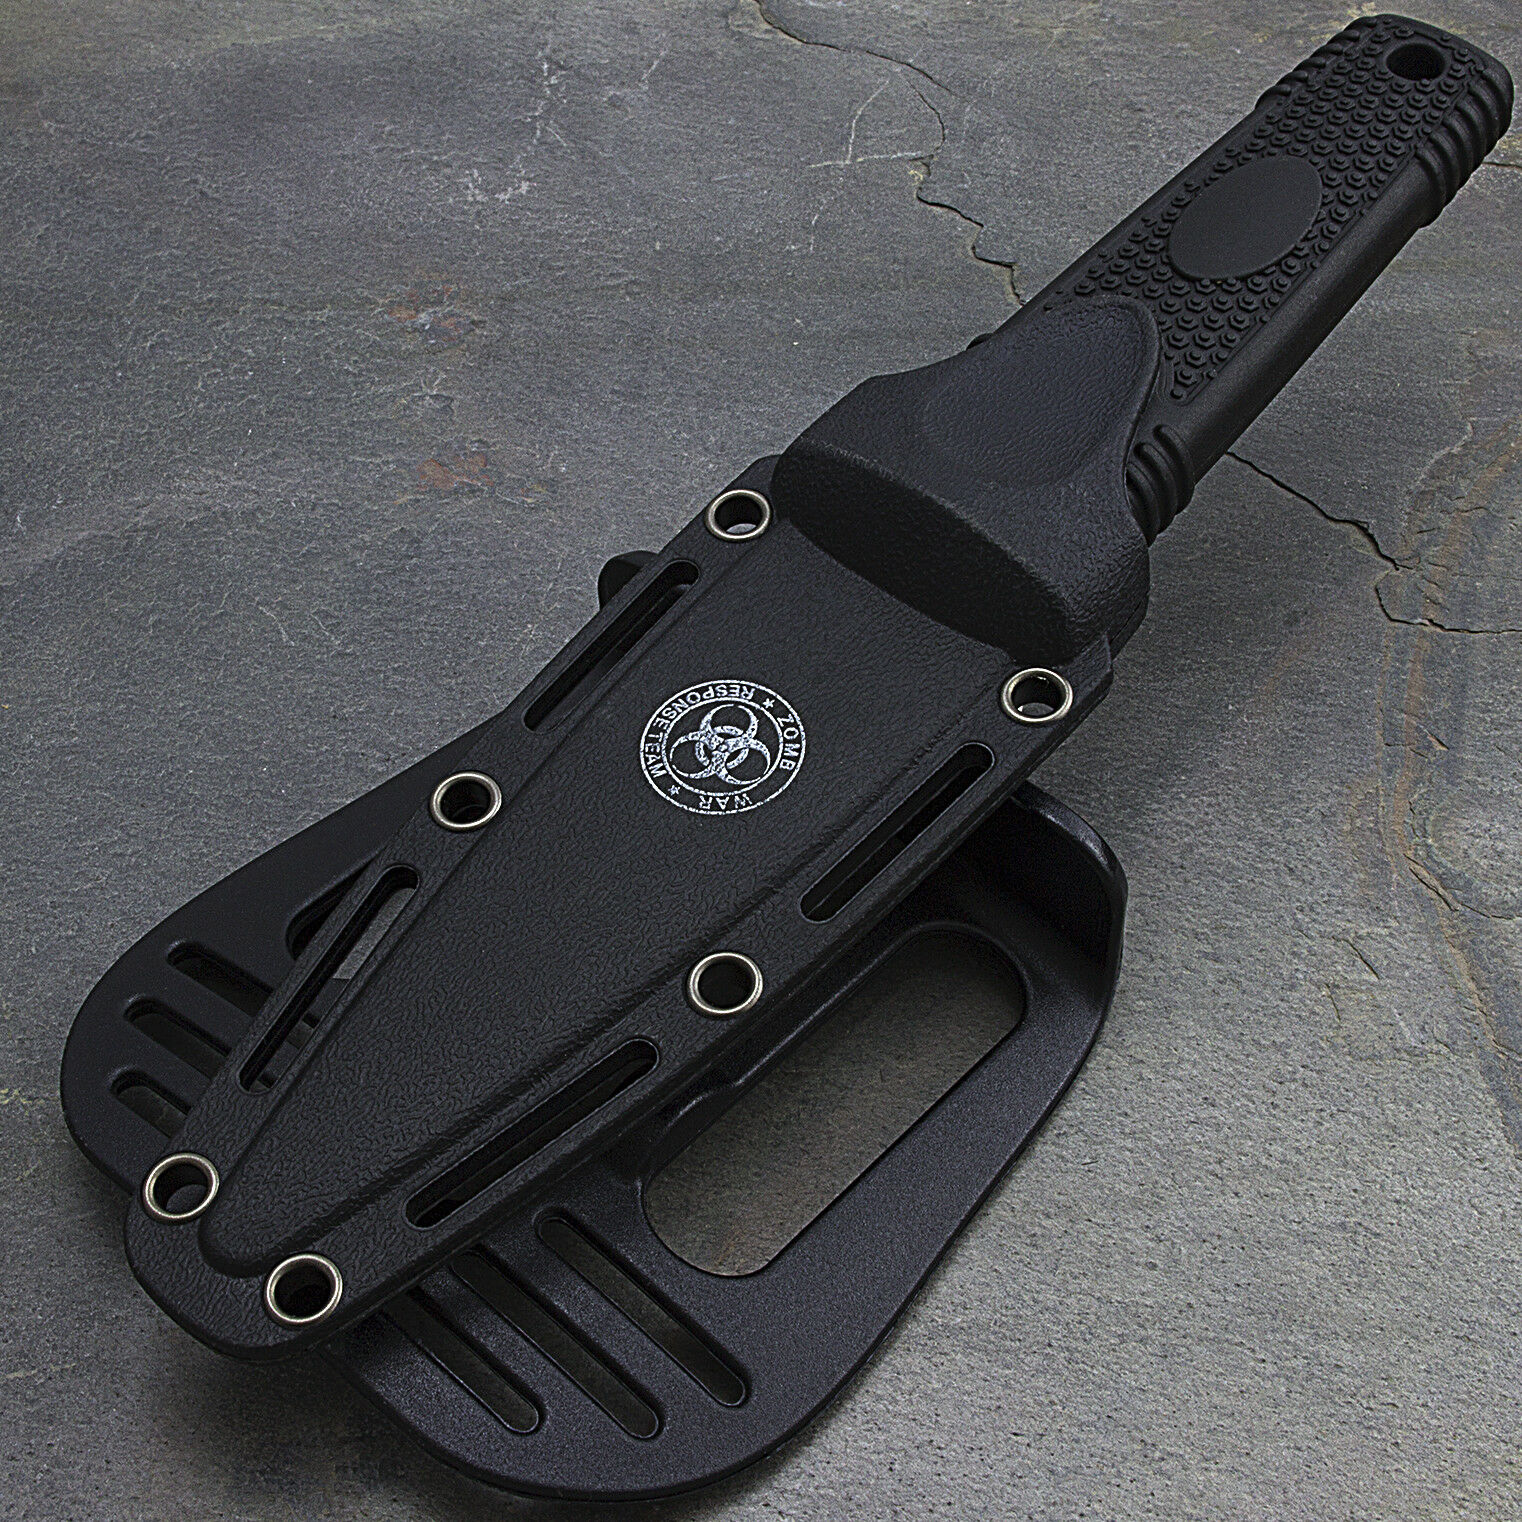 7.75" Zombie War Boot Knife With Sheath Hunting Survival Fixed Blade Tactical